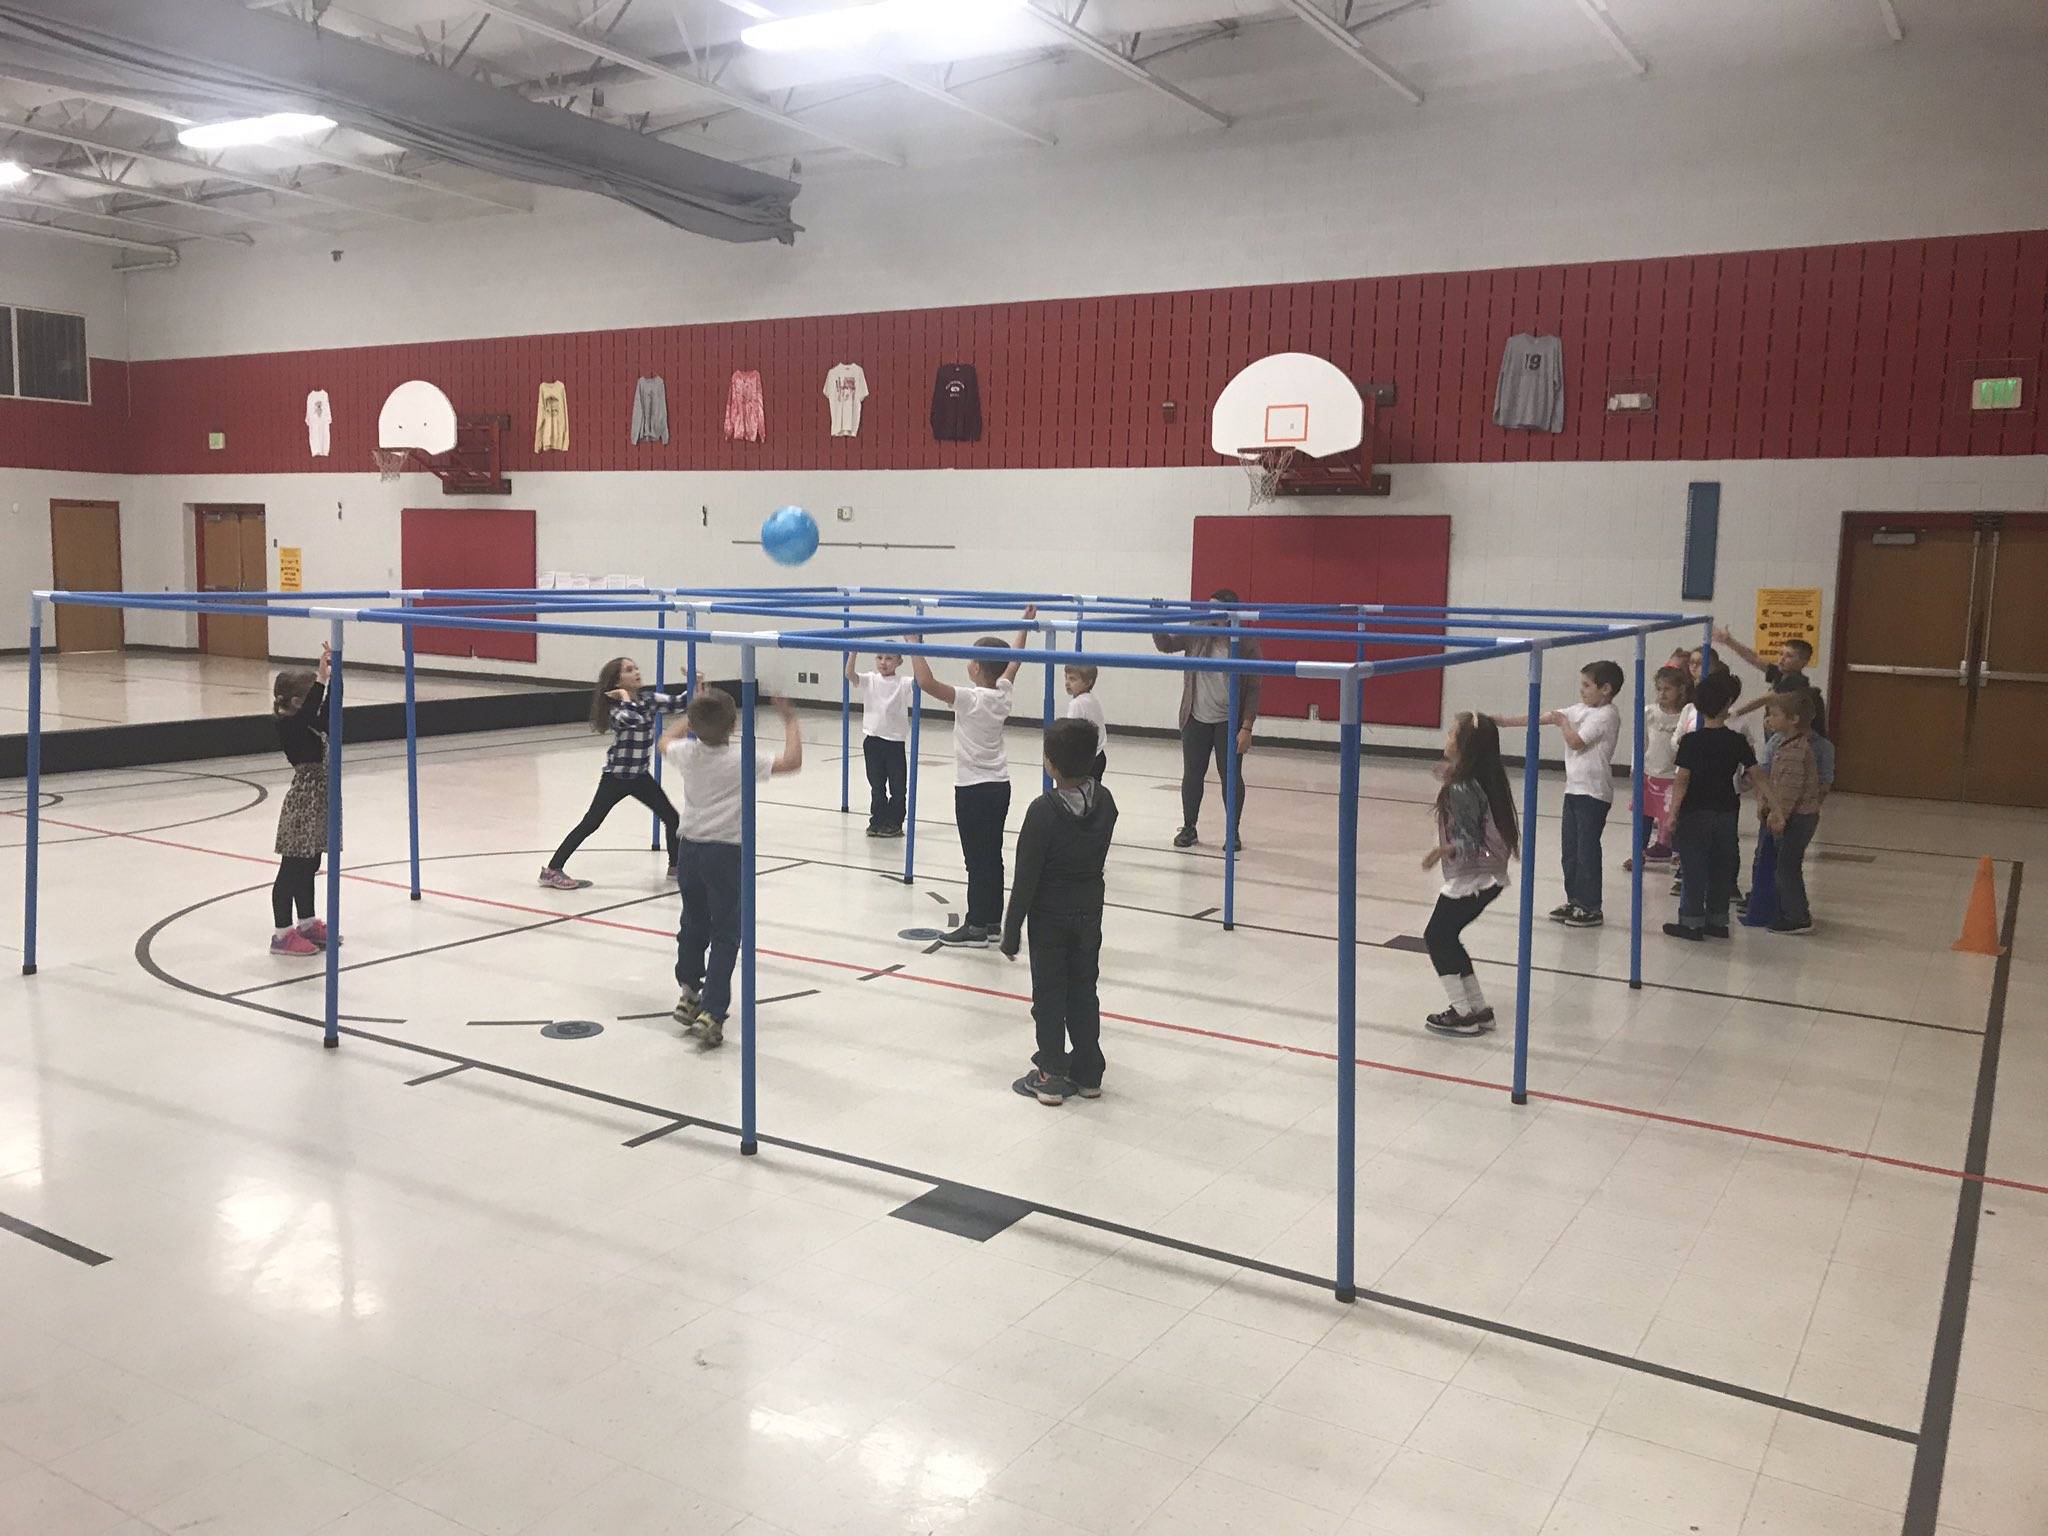 PE activities like 9 Square in the Air allow kids to find fitness that is also fun.